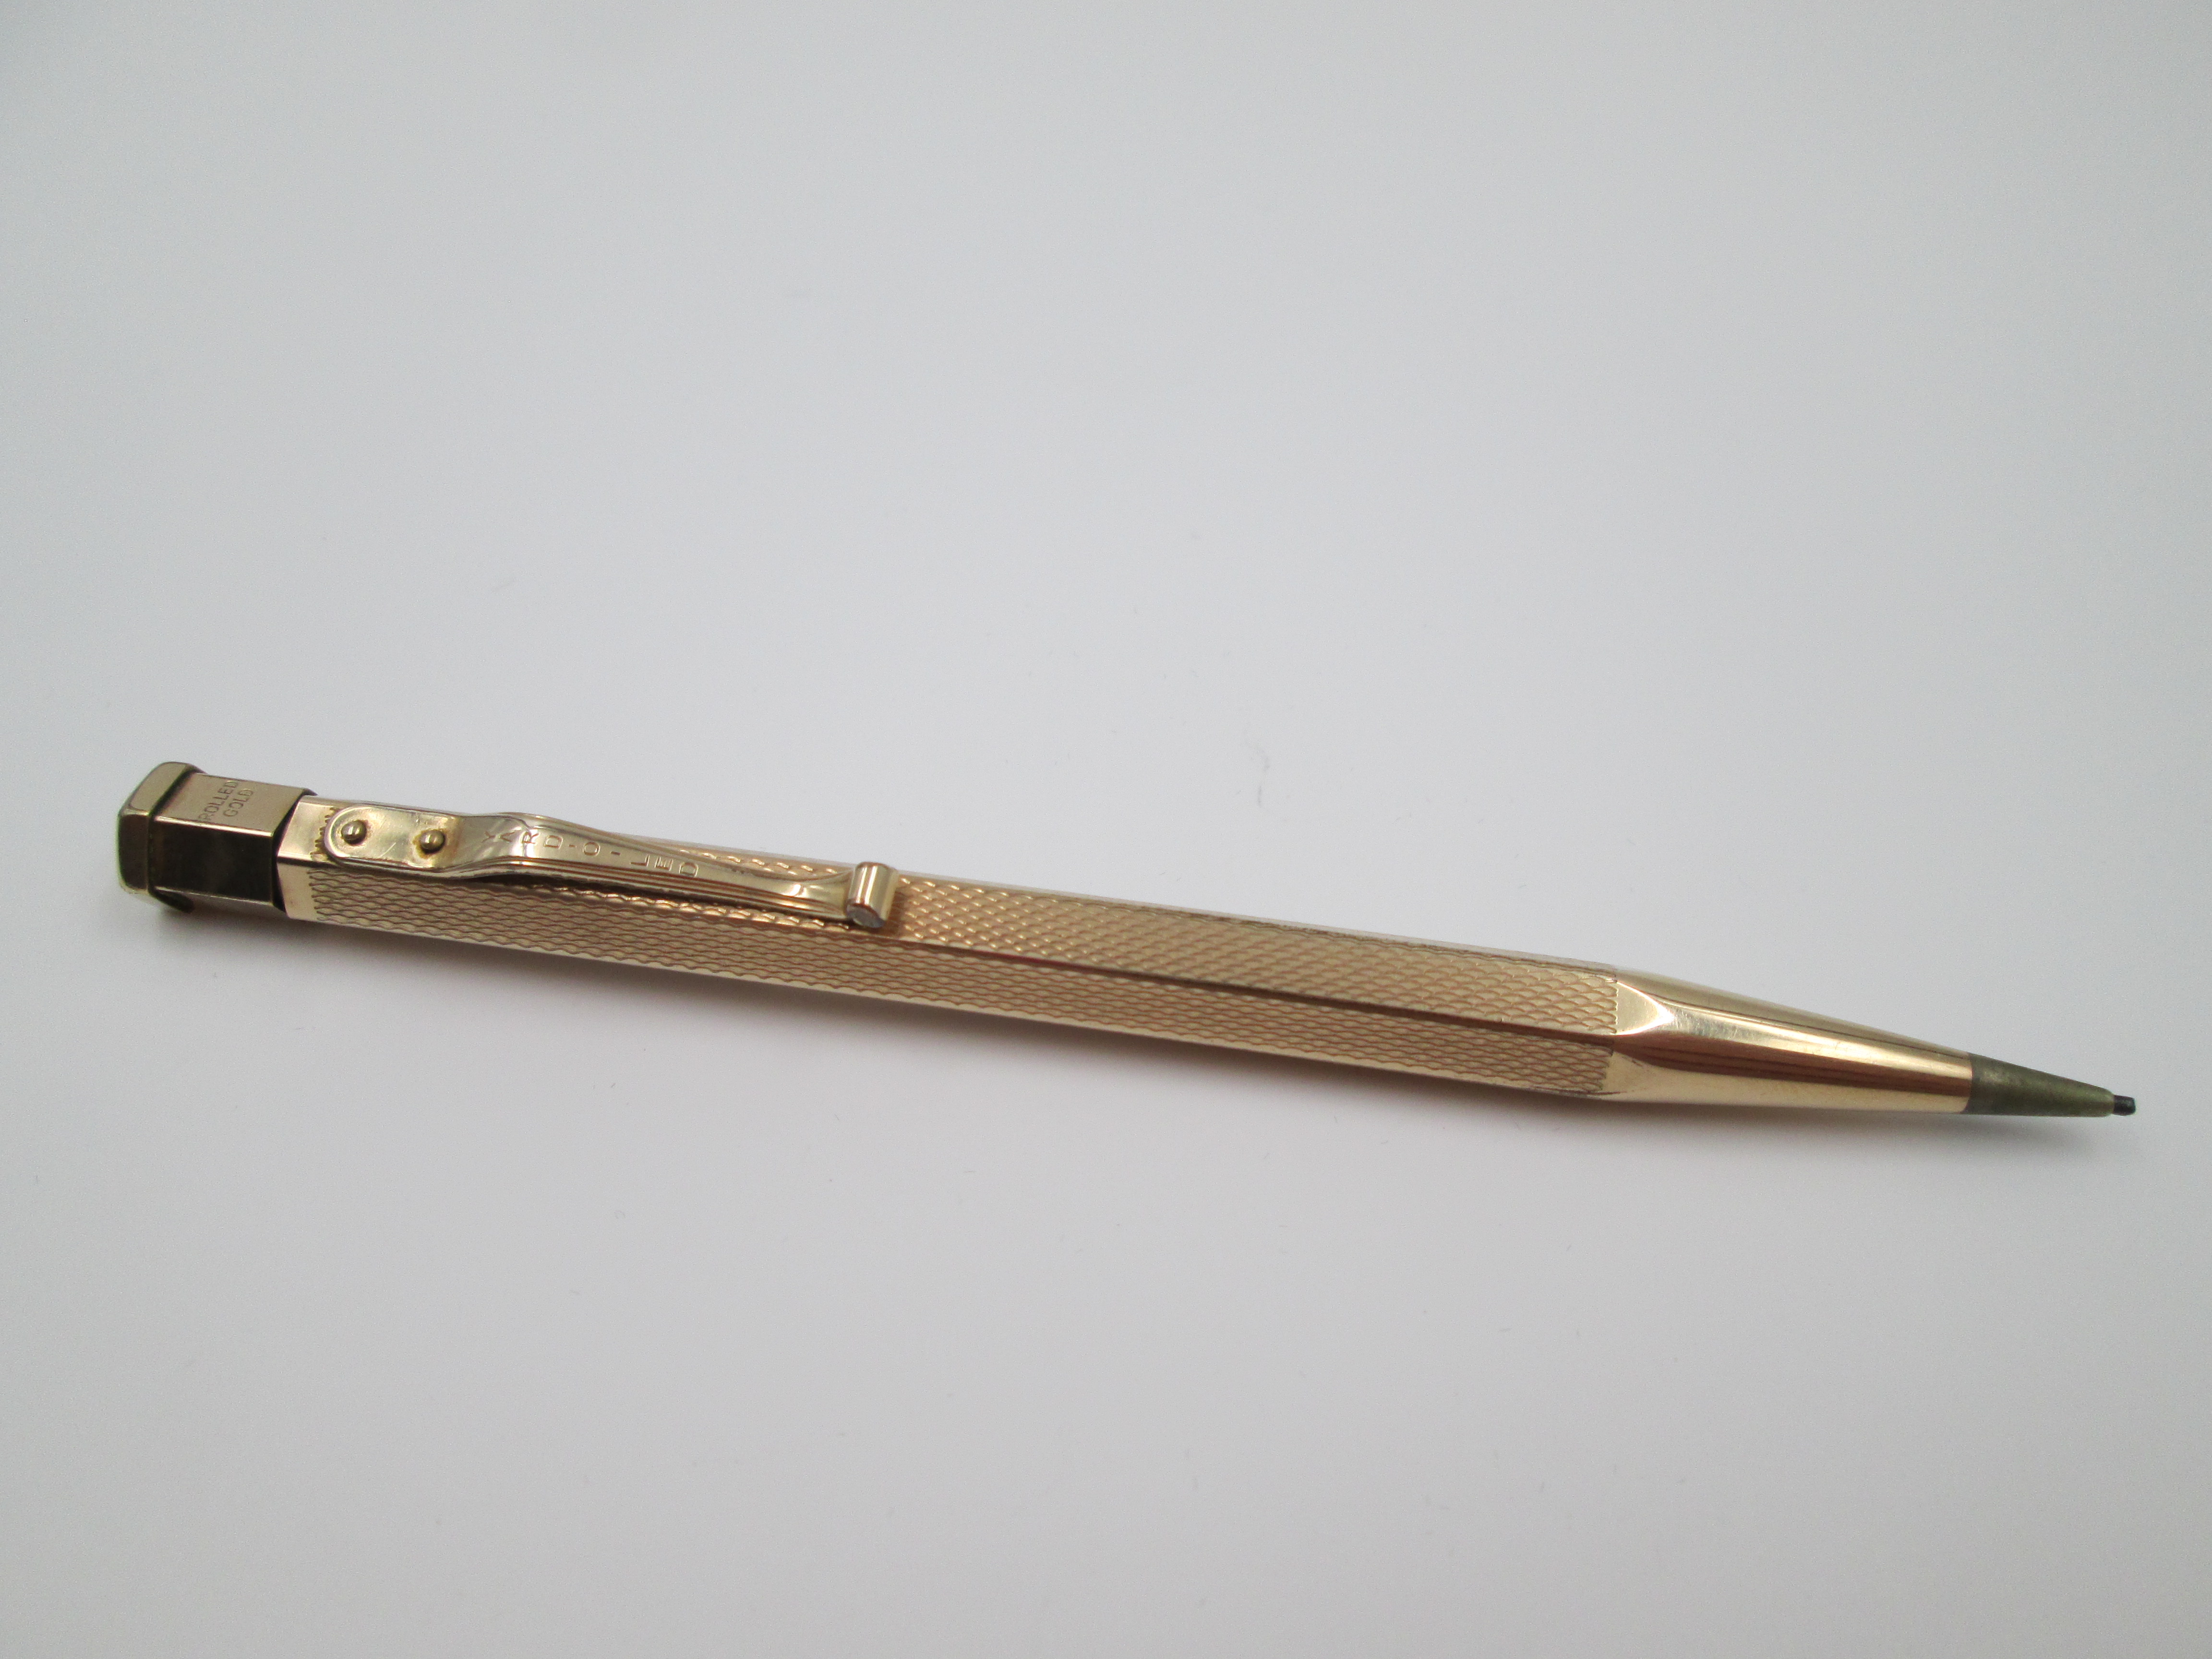 yard-o-led propelling pencil rolled gold 1930 england.